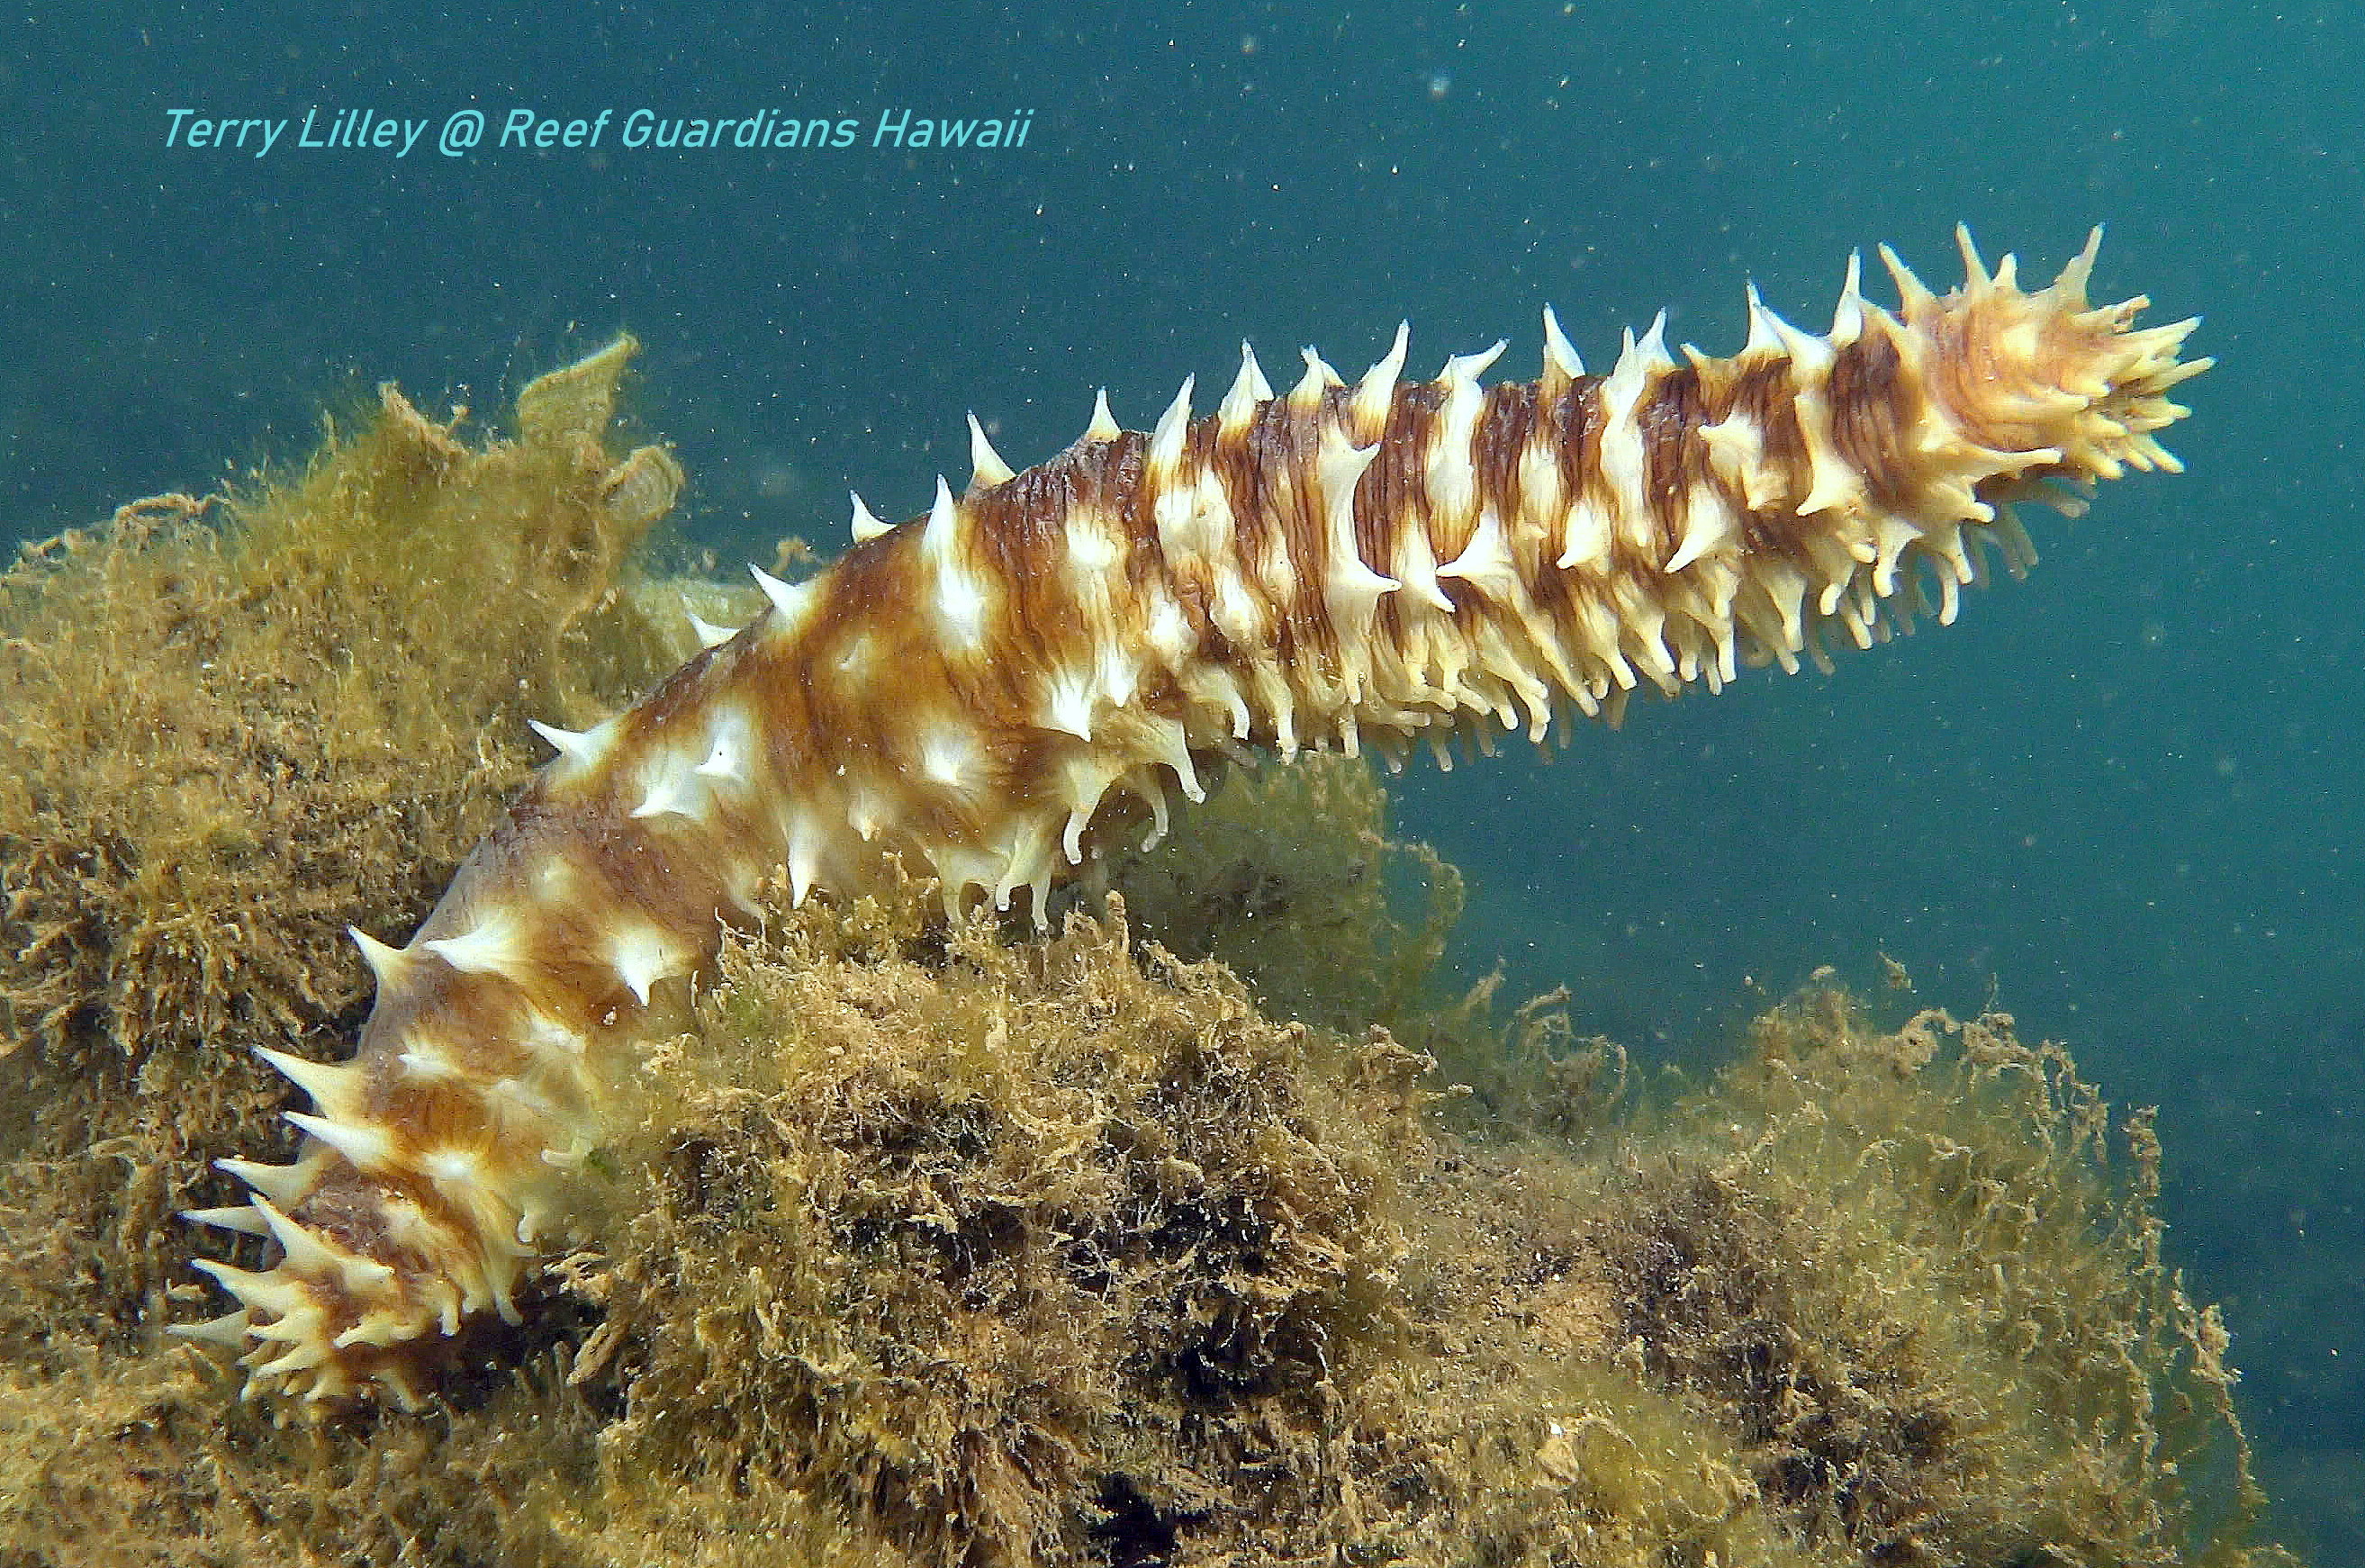 Light-Spotted Sea Cucumber